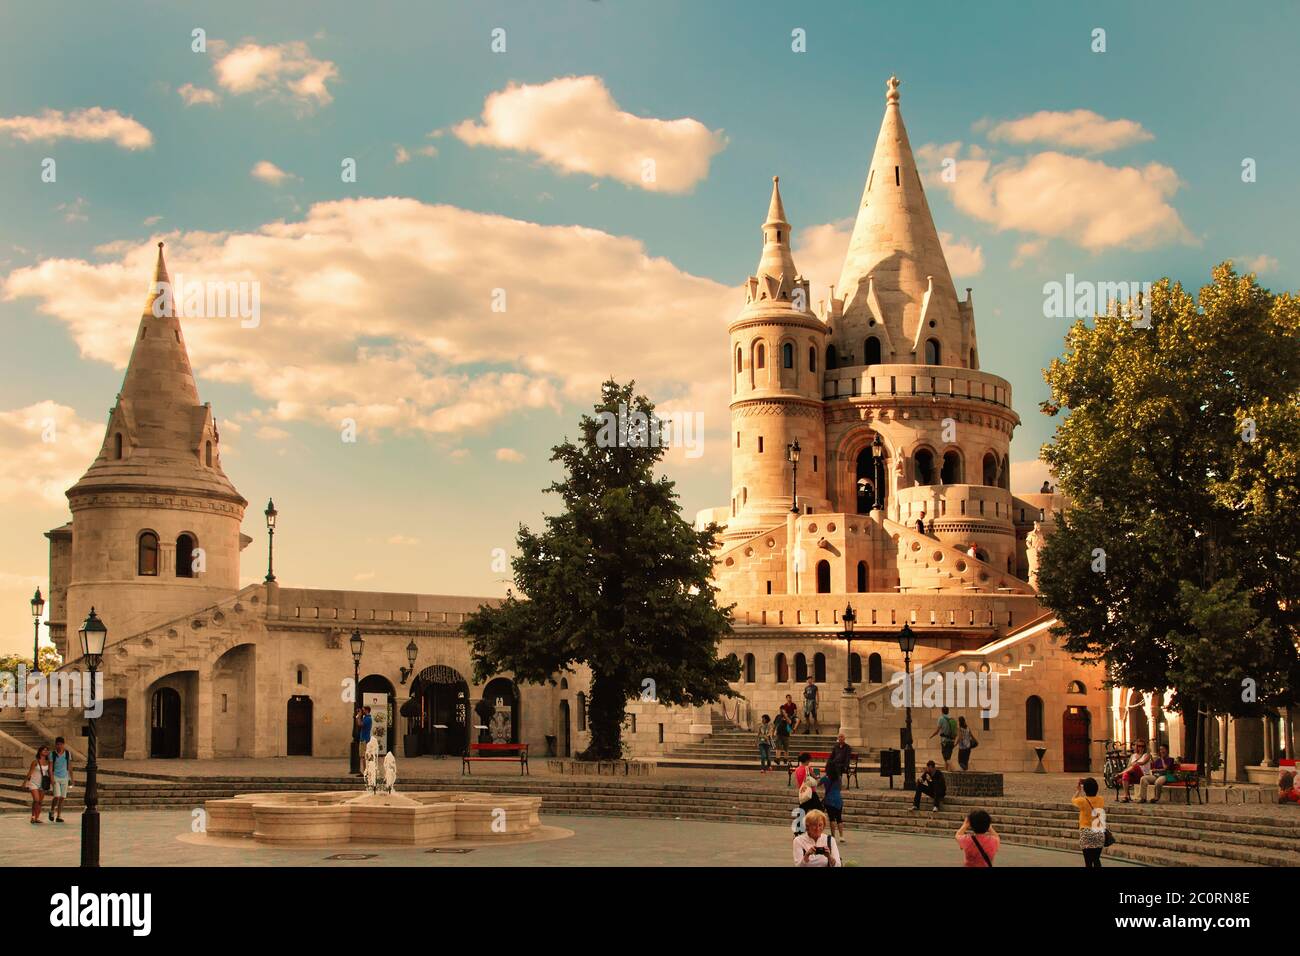 BUDAPEST - JUNE 27: View to Fisherman's Bastion, the terrace in neo-Gothic and neo-Romanesque style situated on the Buda bank of Stock Photo